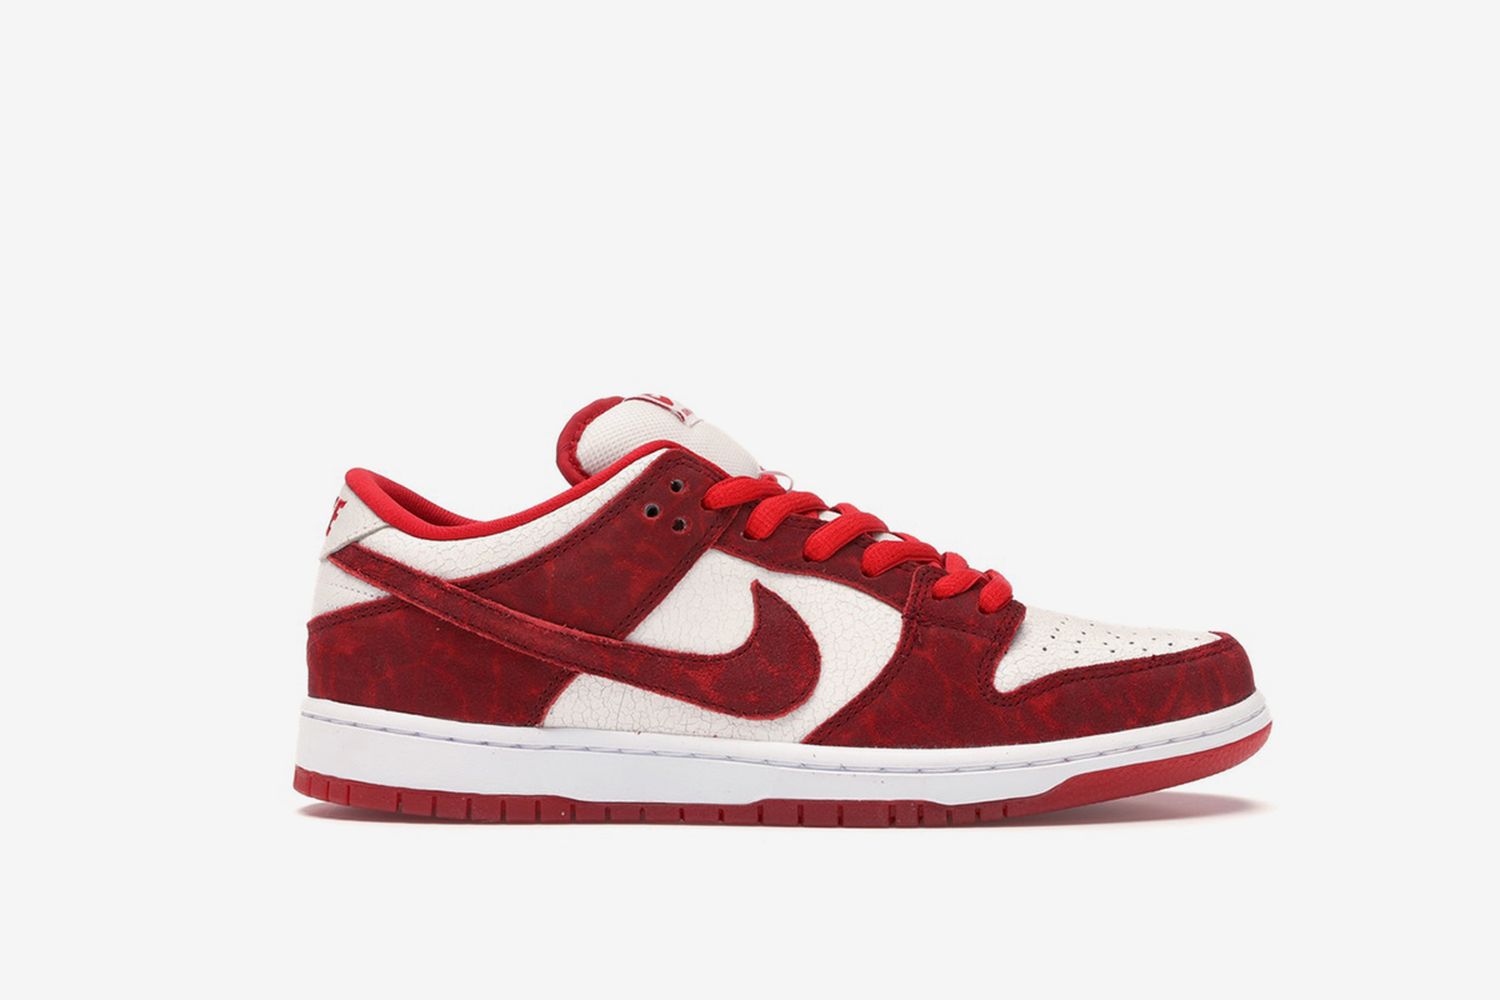 Shop Two New Nike Dunk Sneakers at StockX Now